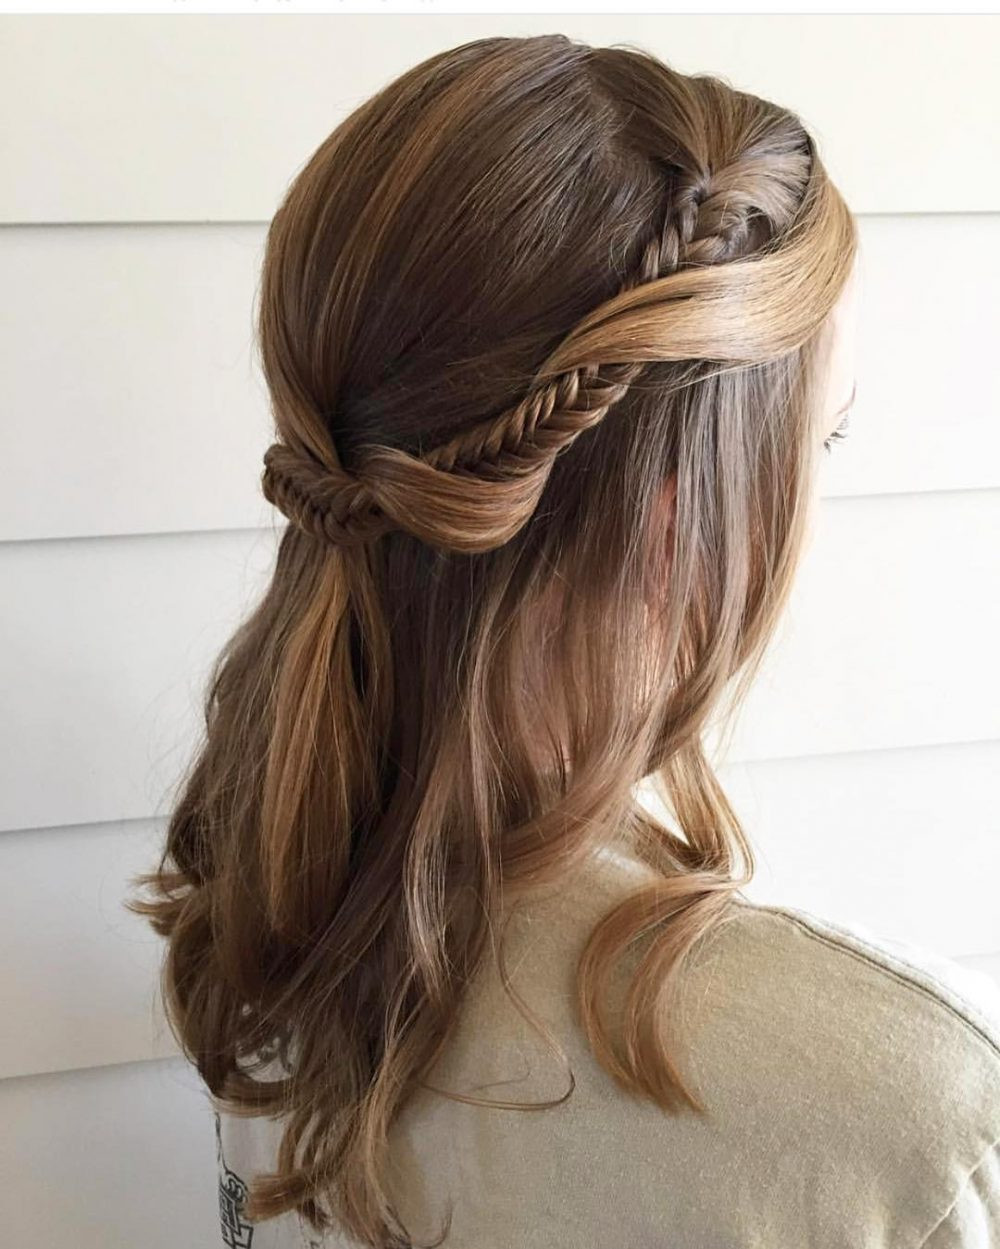 DIY Formal Hairstyles
 33 Ridiculously Easy DIY Chic Updos